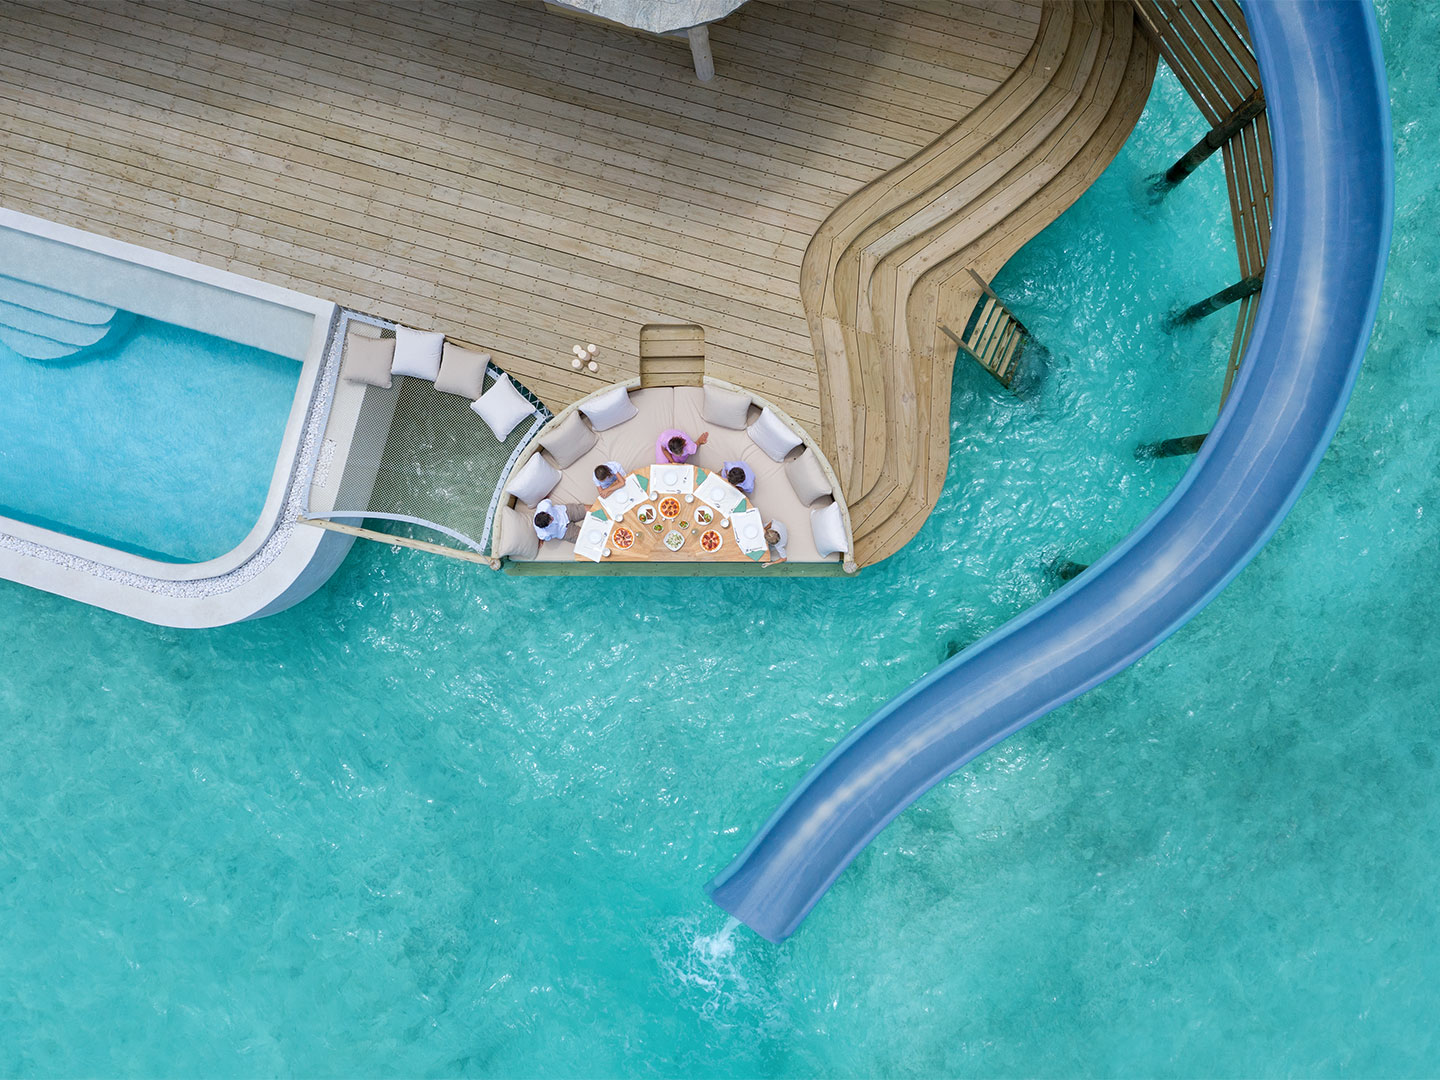 Slide into the ocean in the Maldives from an over-water villa